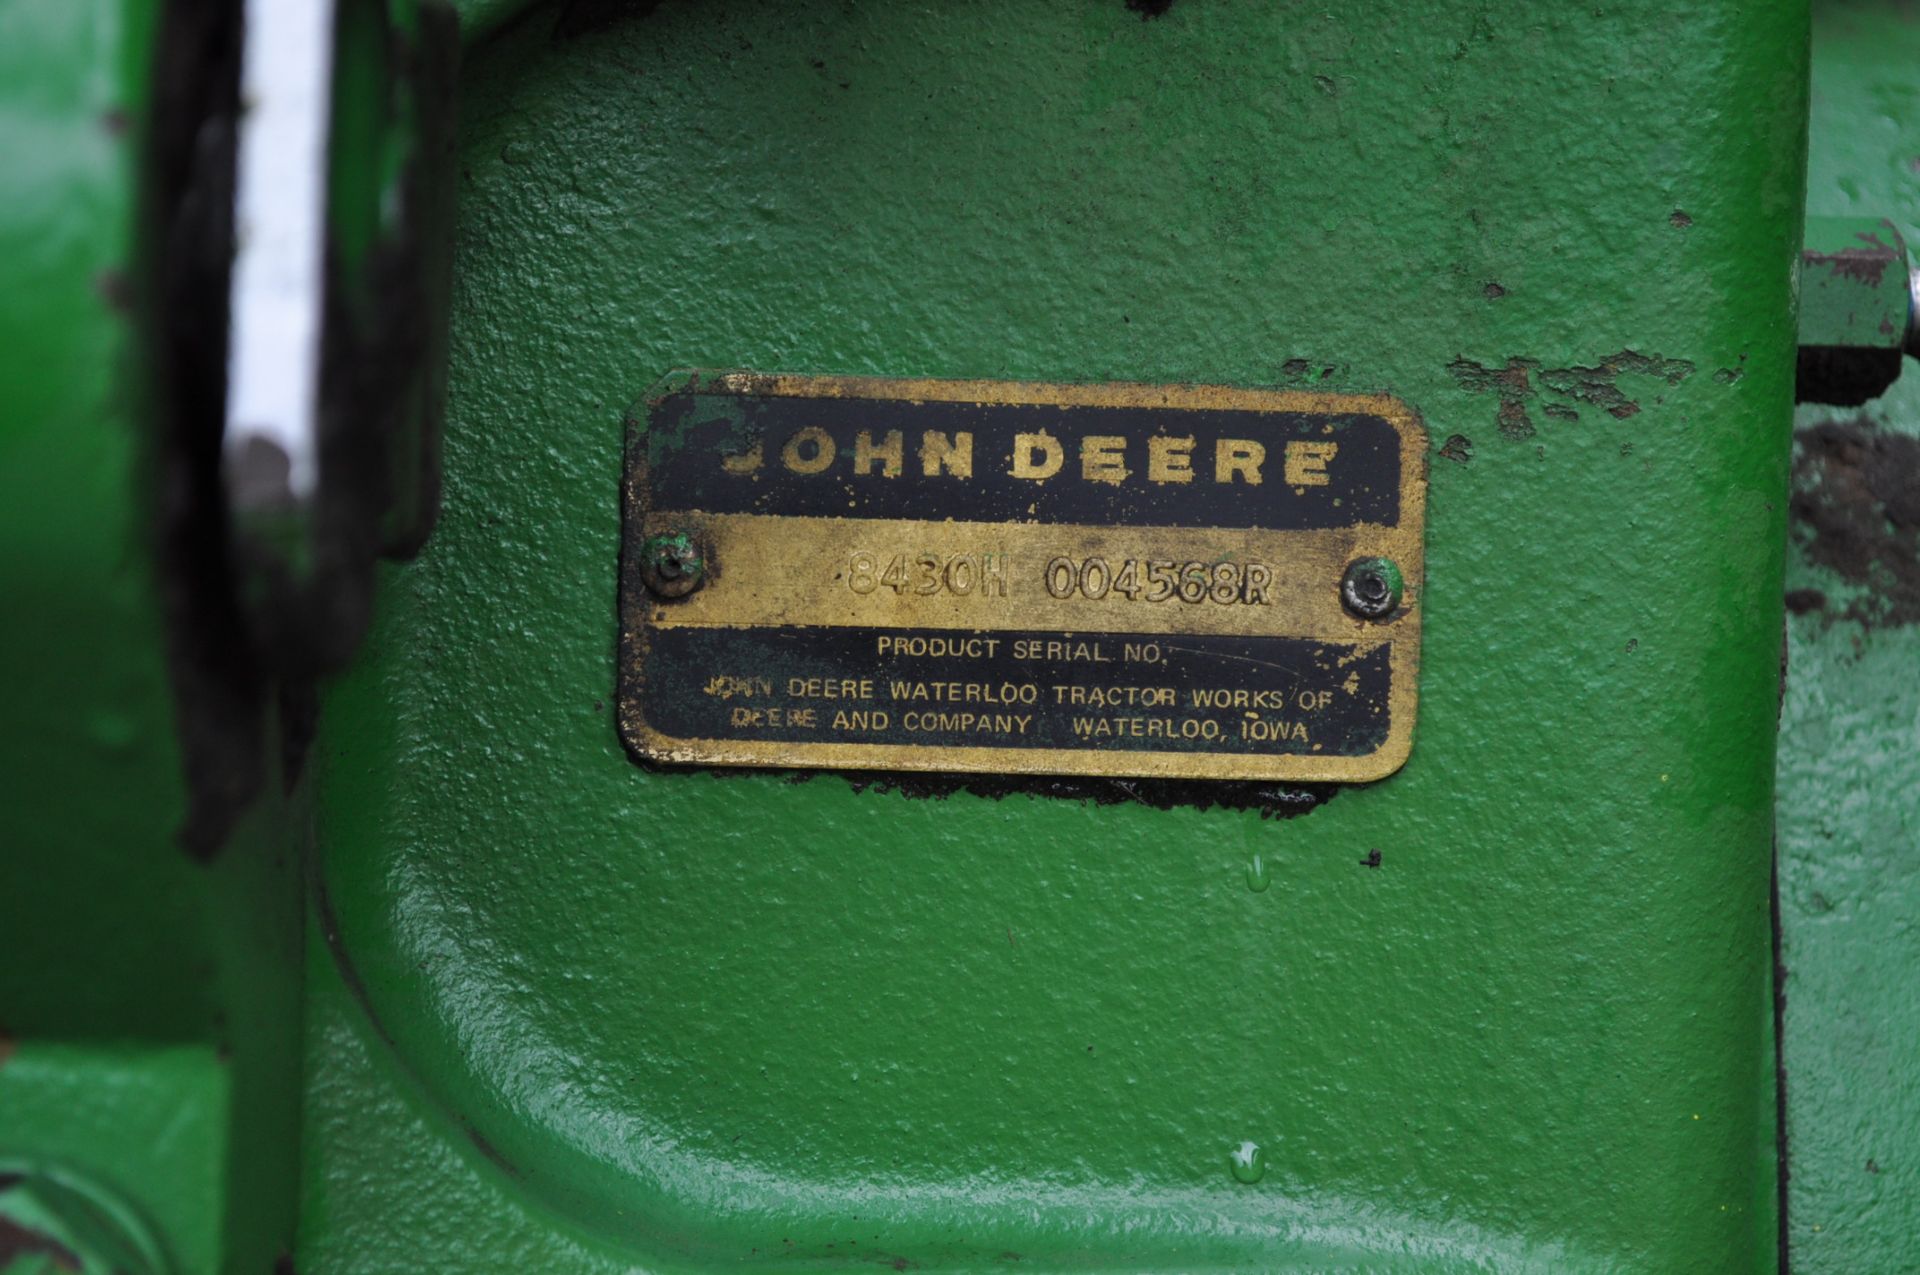 John Deere 8430 tractor, 4WD, diesel, 20.8-34 duals, CHA, Quad range, 3 hyd remotes, 1000 pto, 3 pt, - Image 13 of 19